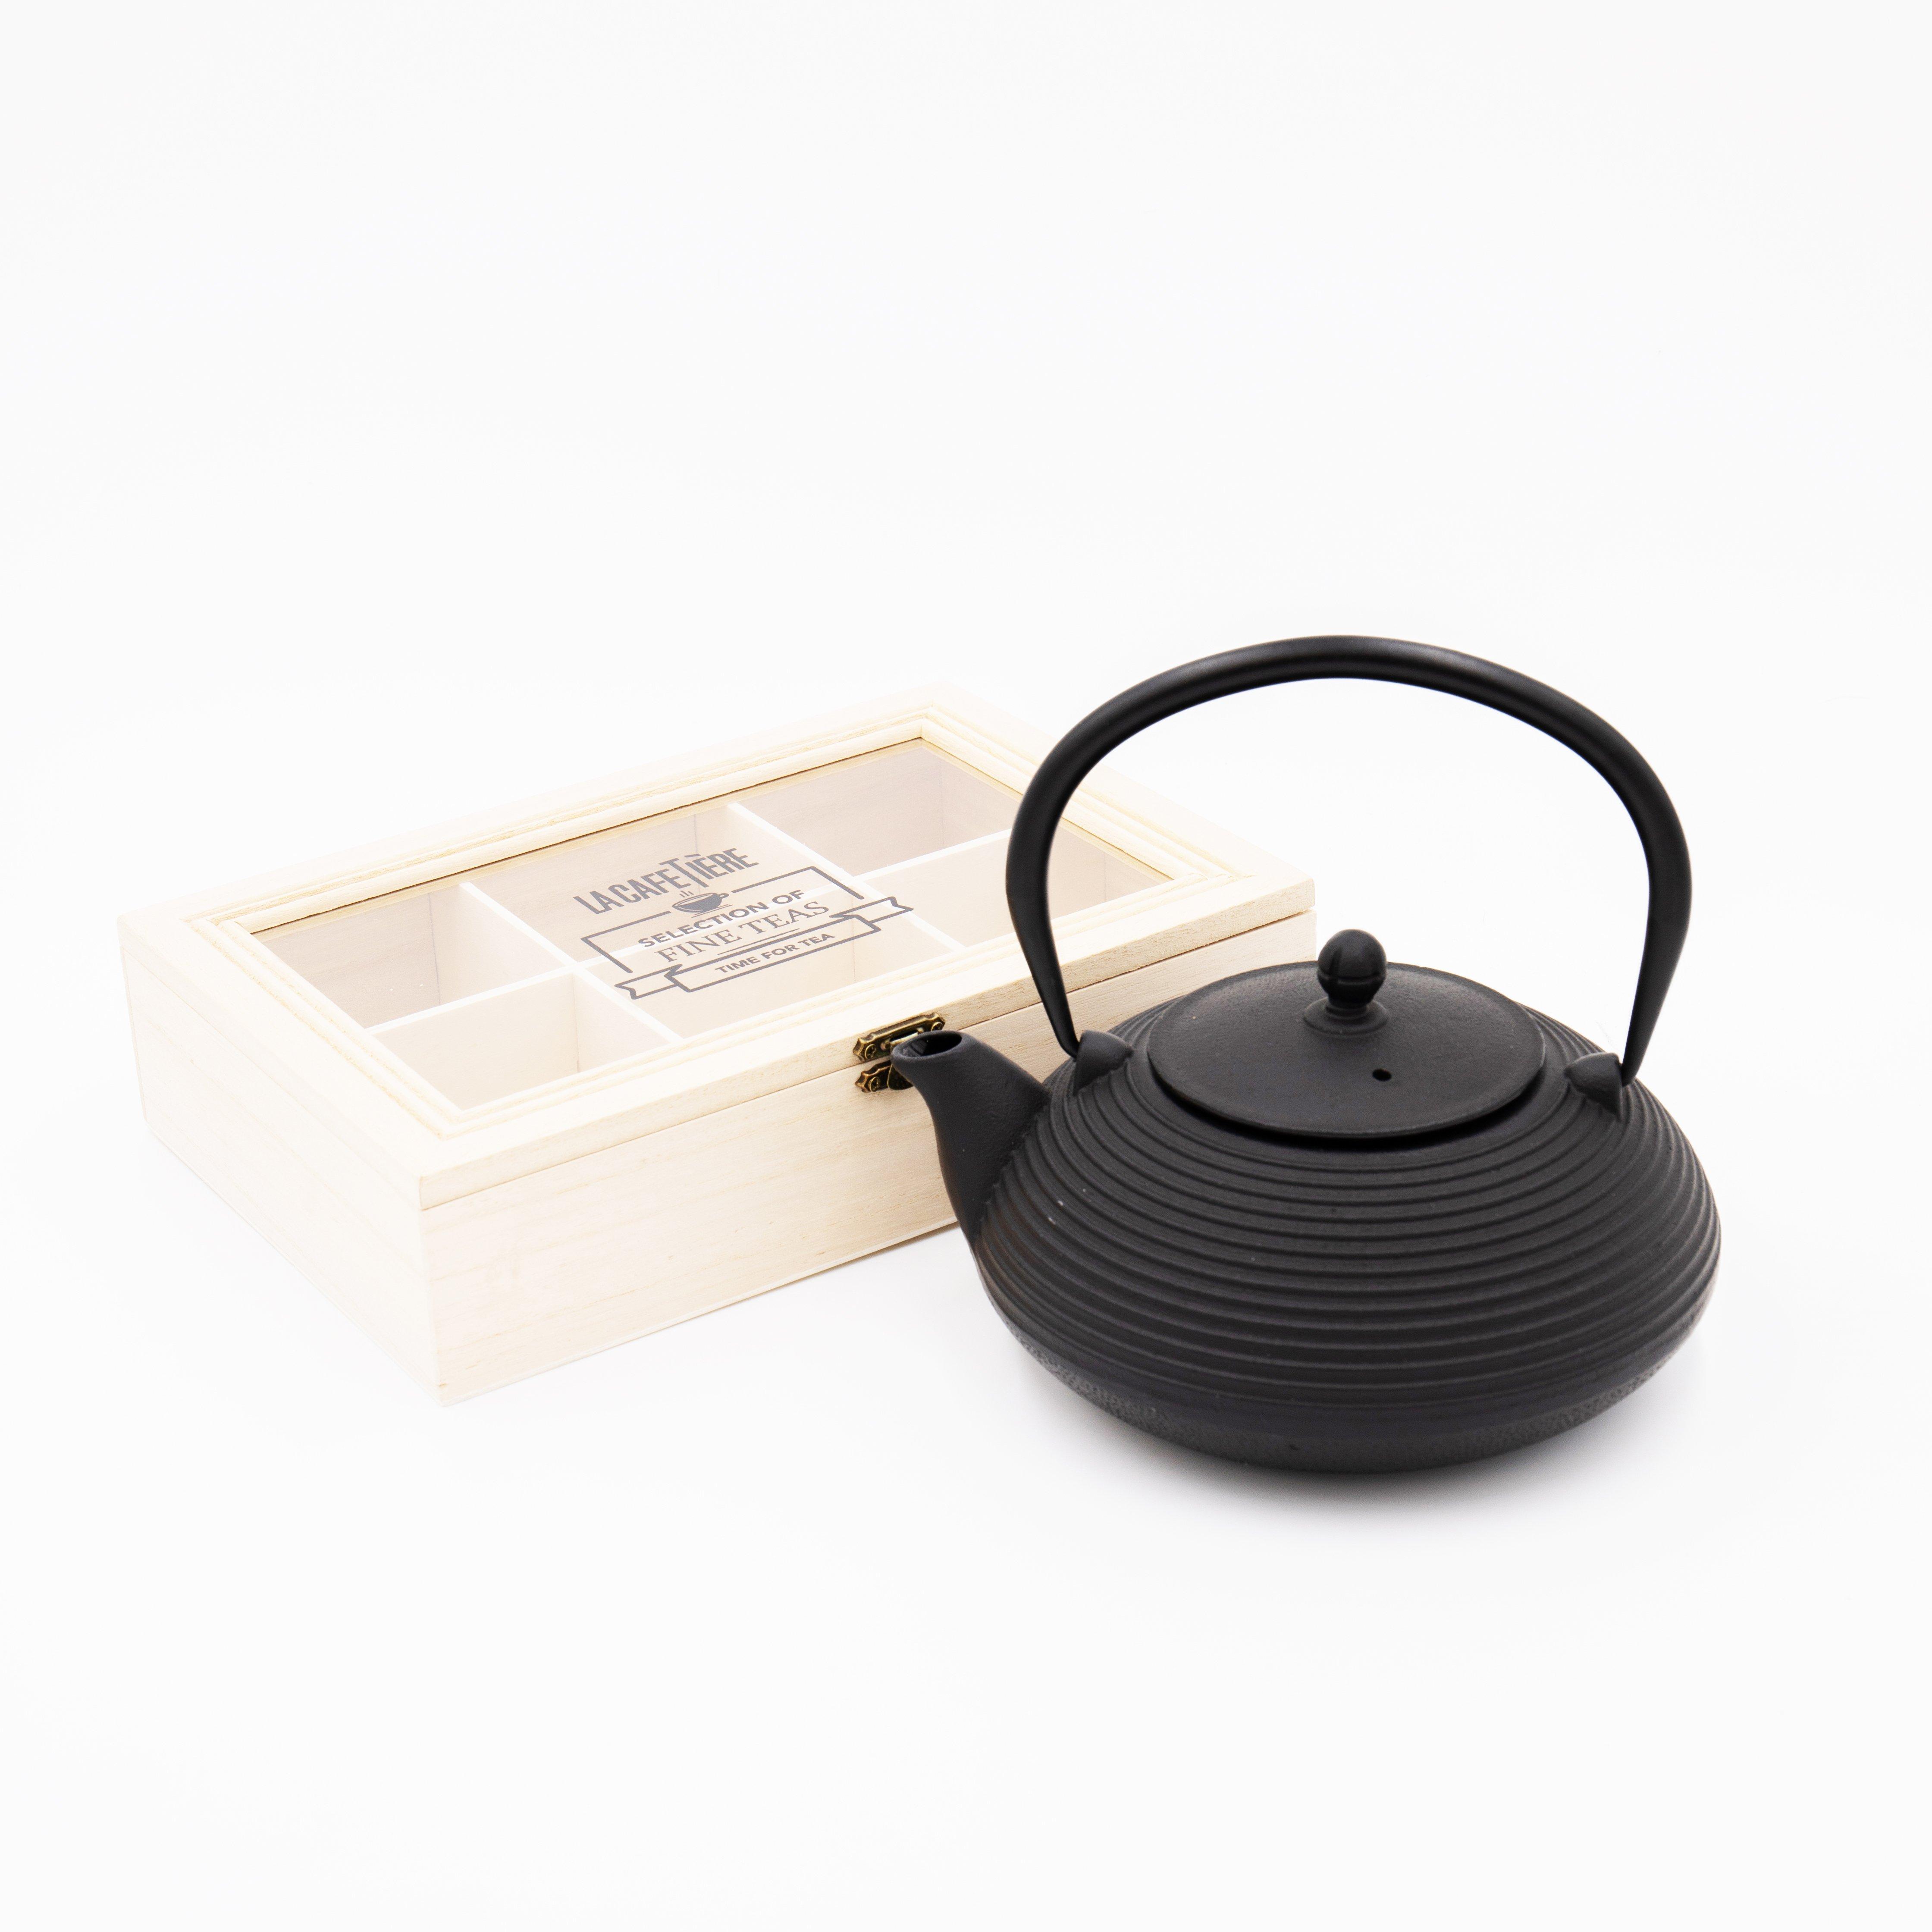 2pc Tea Set including Large Black Cast Iron Teapot with Infuser, 900ml and Wooden Compartment Tea Bo